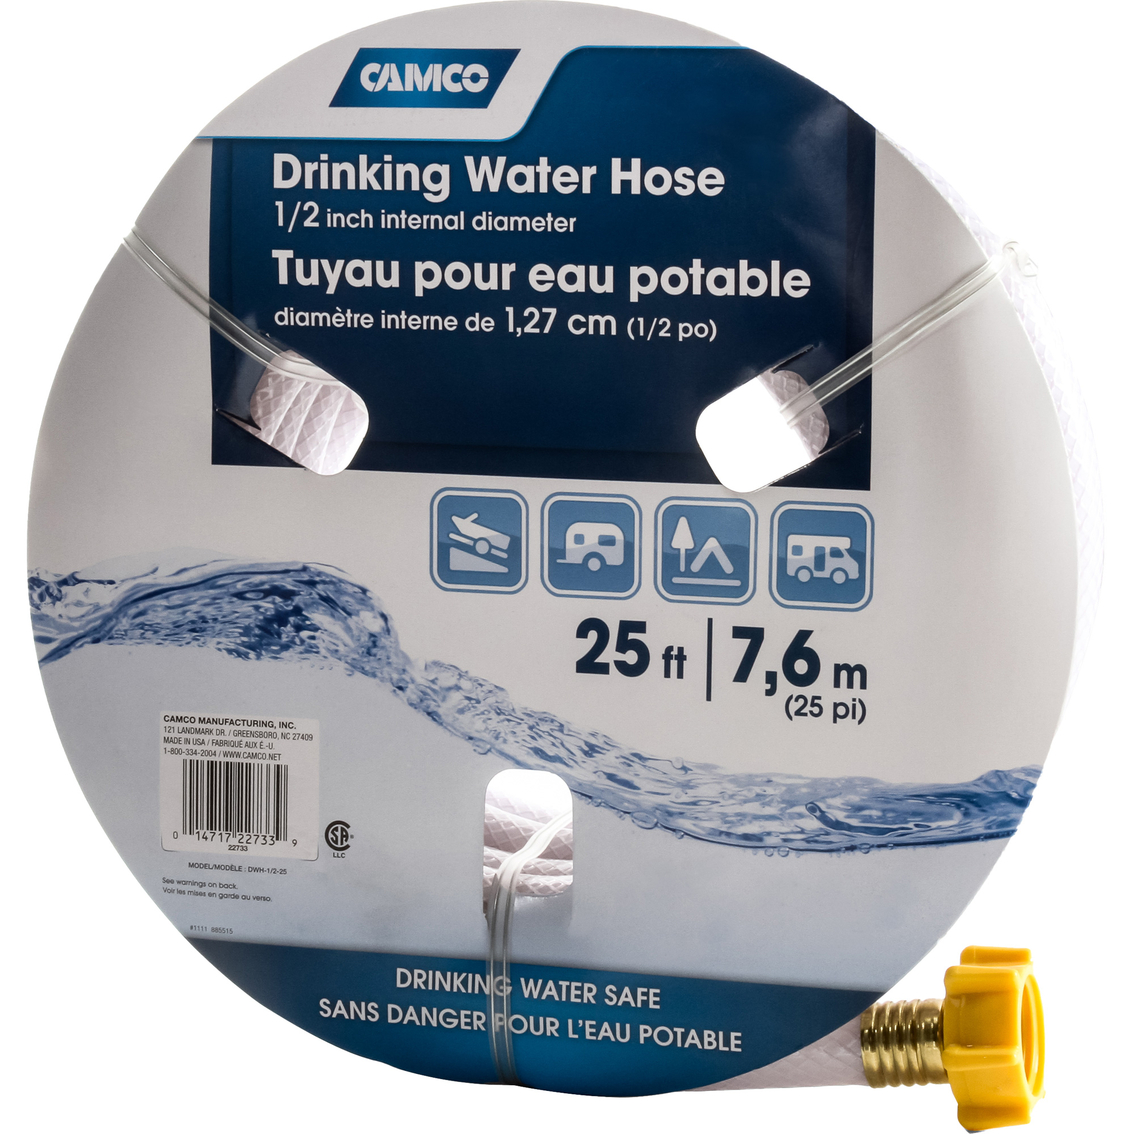 Camco Taste Pure 25 ft. Drinking Water Hose - Image 2 of 3